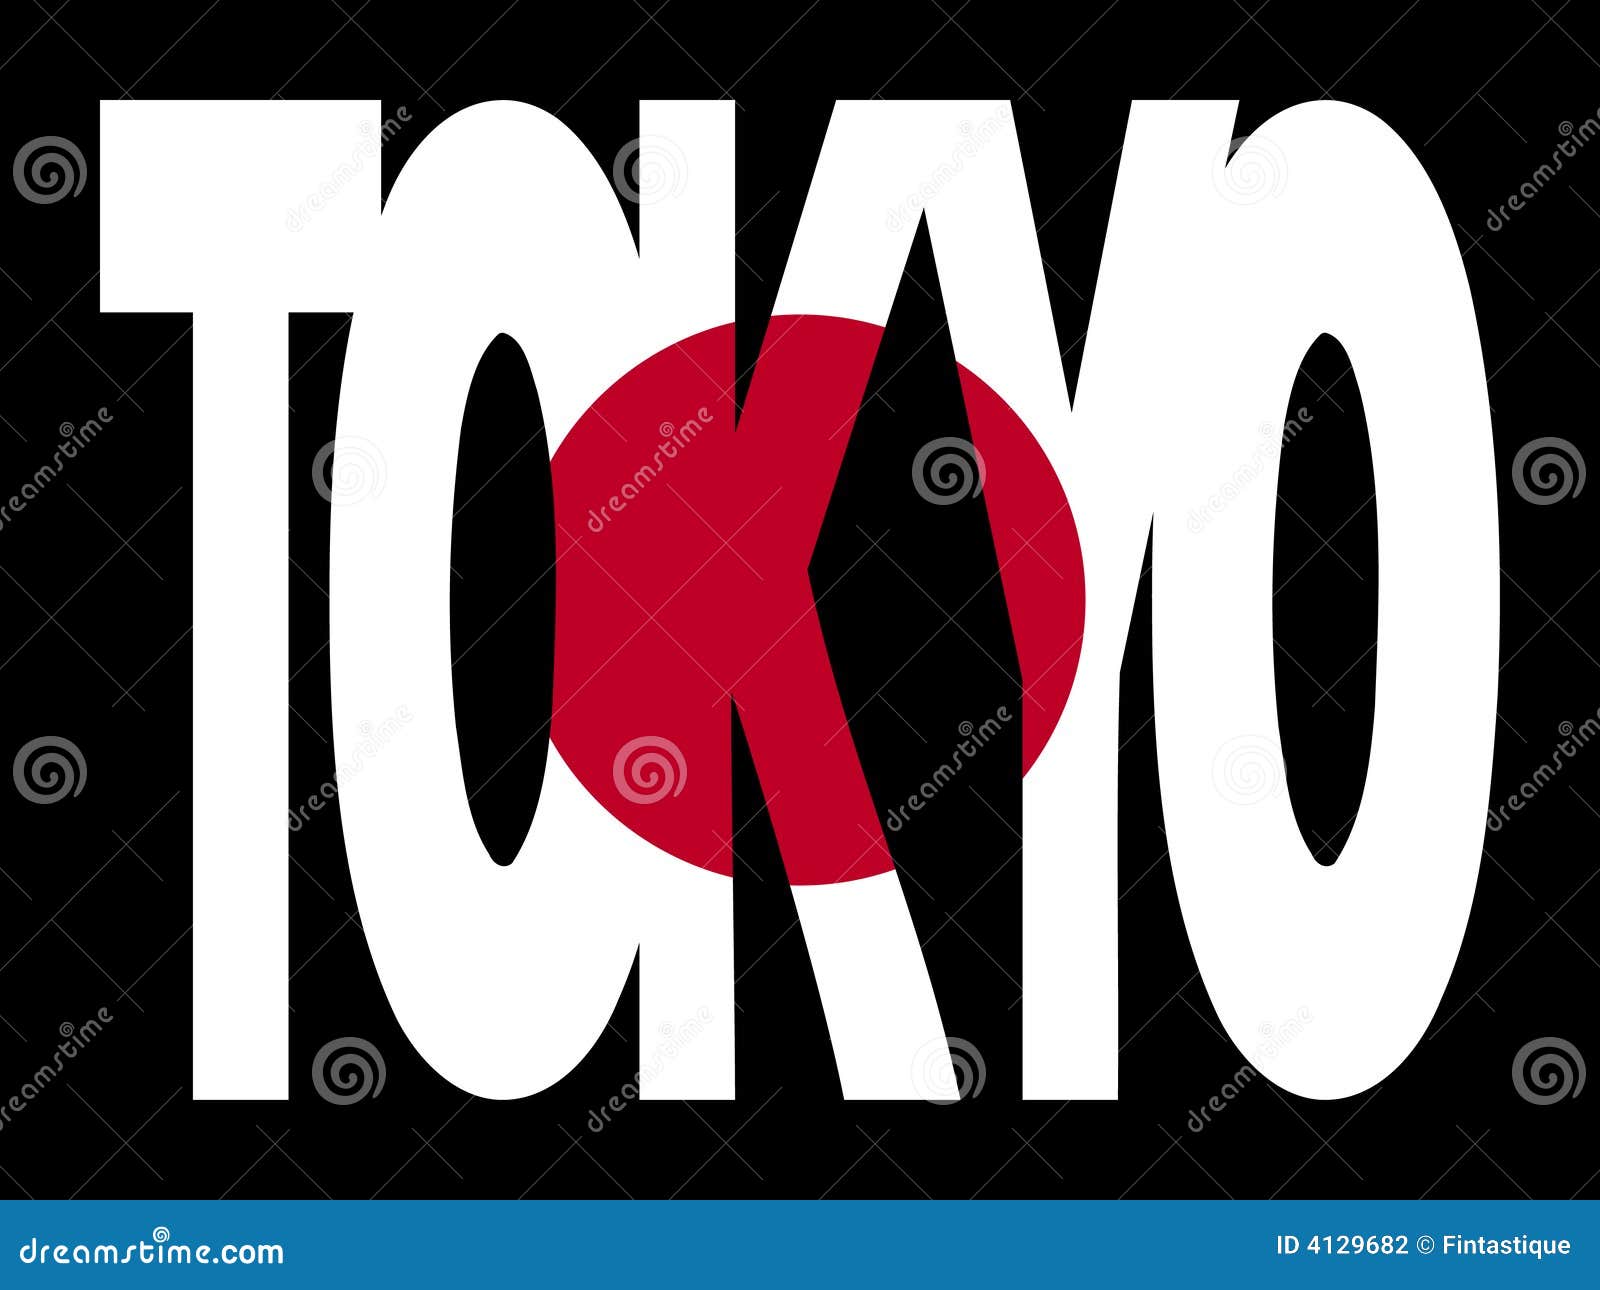 Tokyo text with flag stock vector. Illustration of outline - 4129682